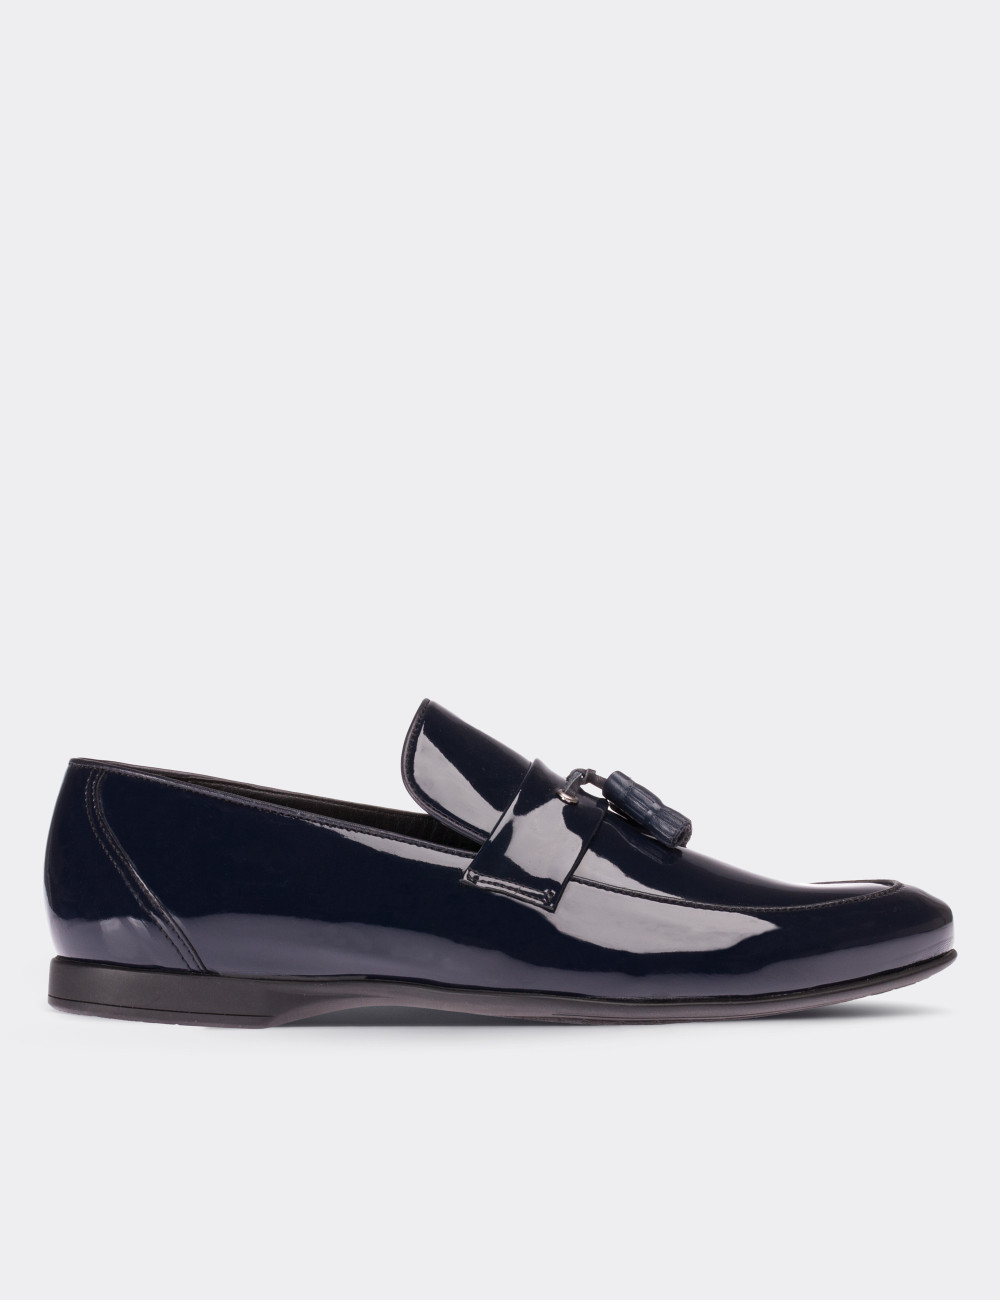 Navy Patent Leather Loafers - Deery